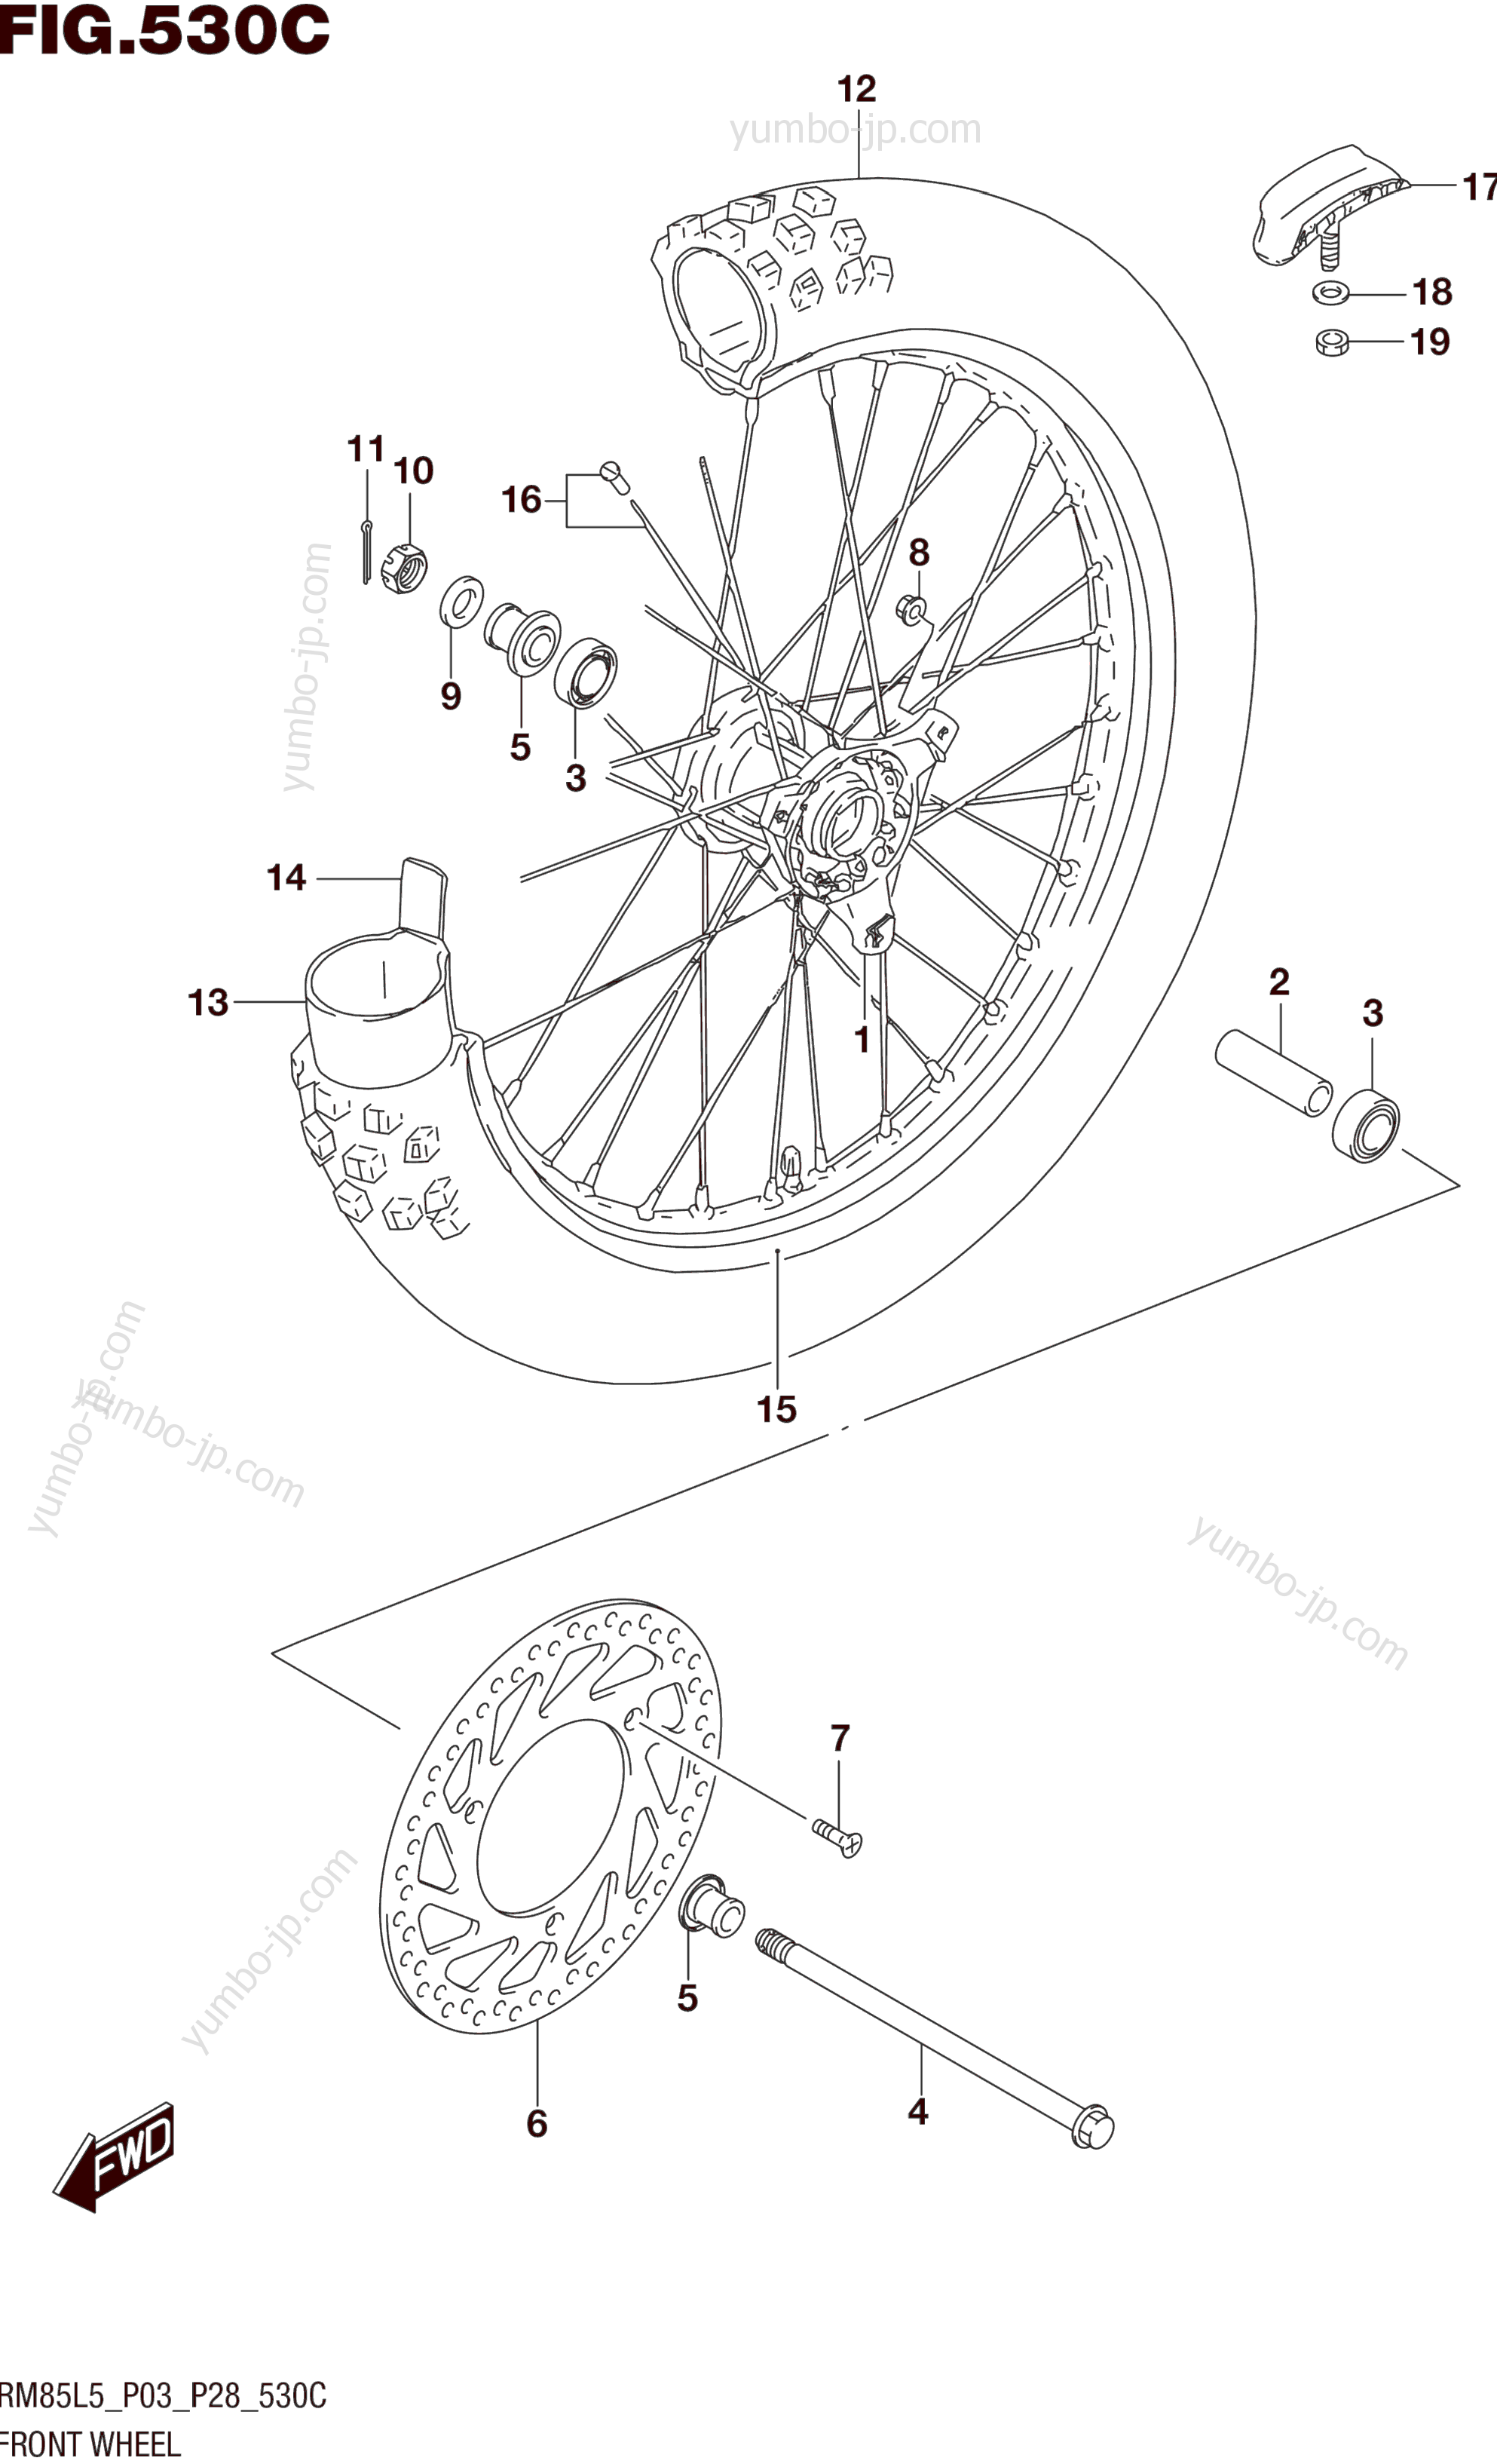 FRONT WHEEL (RM85LL5 P28) for motorcycles SUZUKI RM85 2015 year